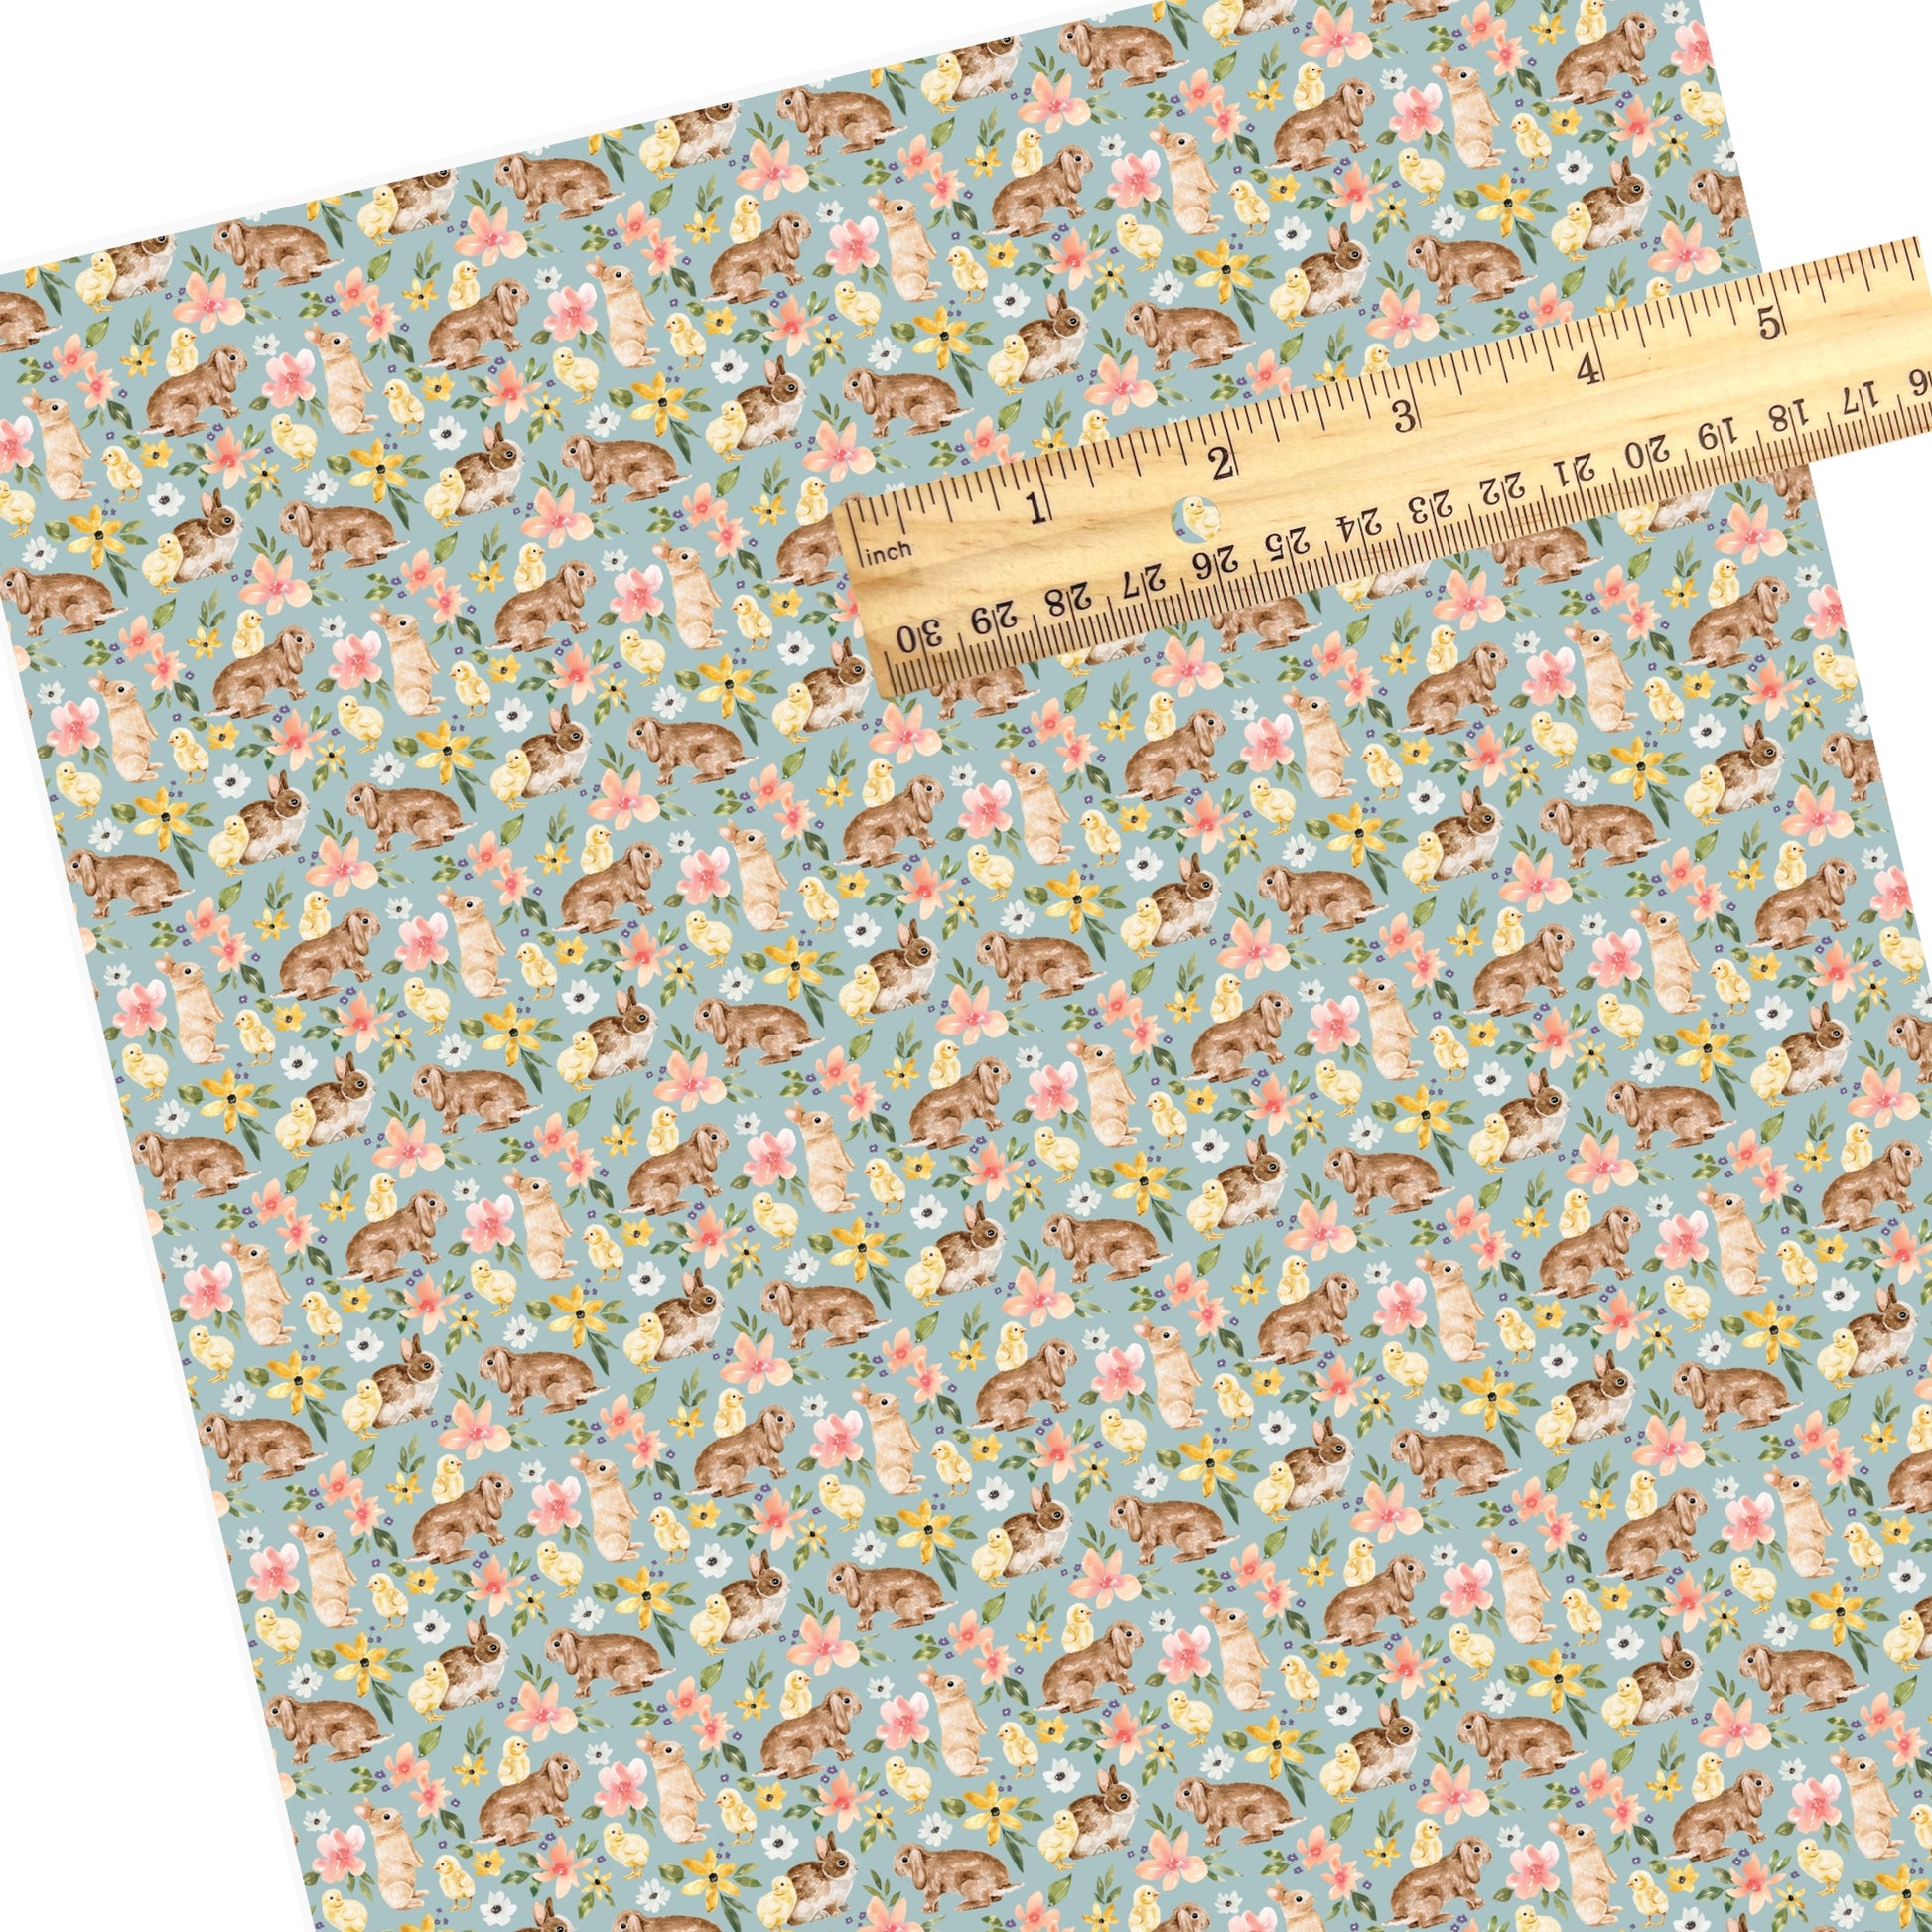 Yellow, white, and pink flowers with brown bunnies and yellow chicks on blue faux leather sheets